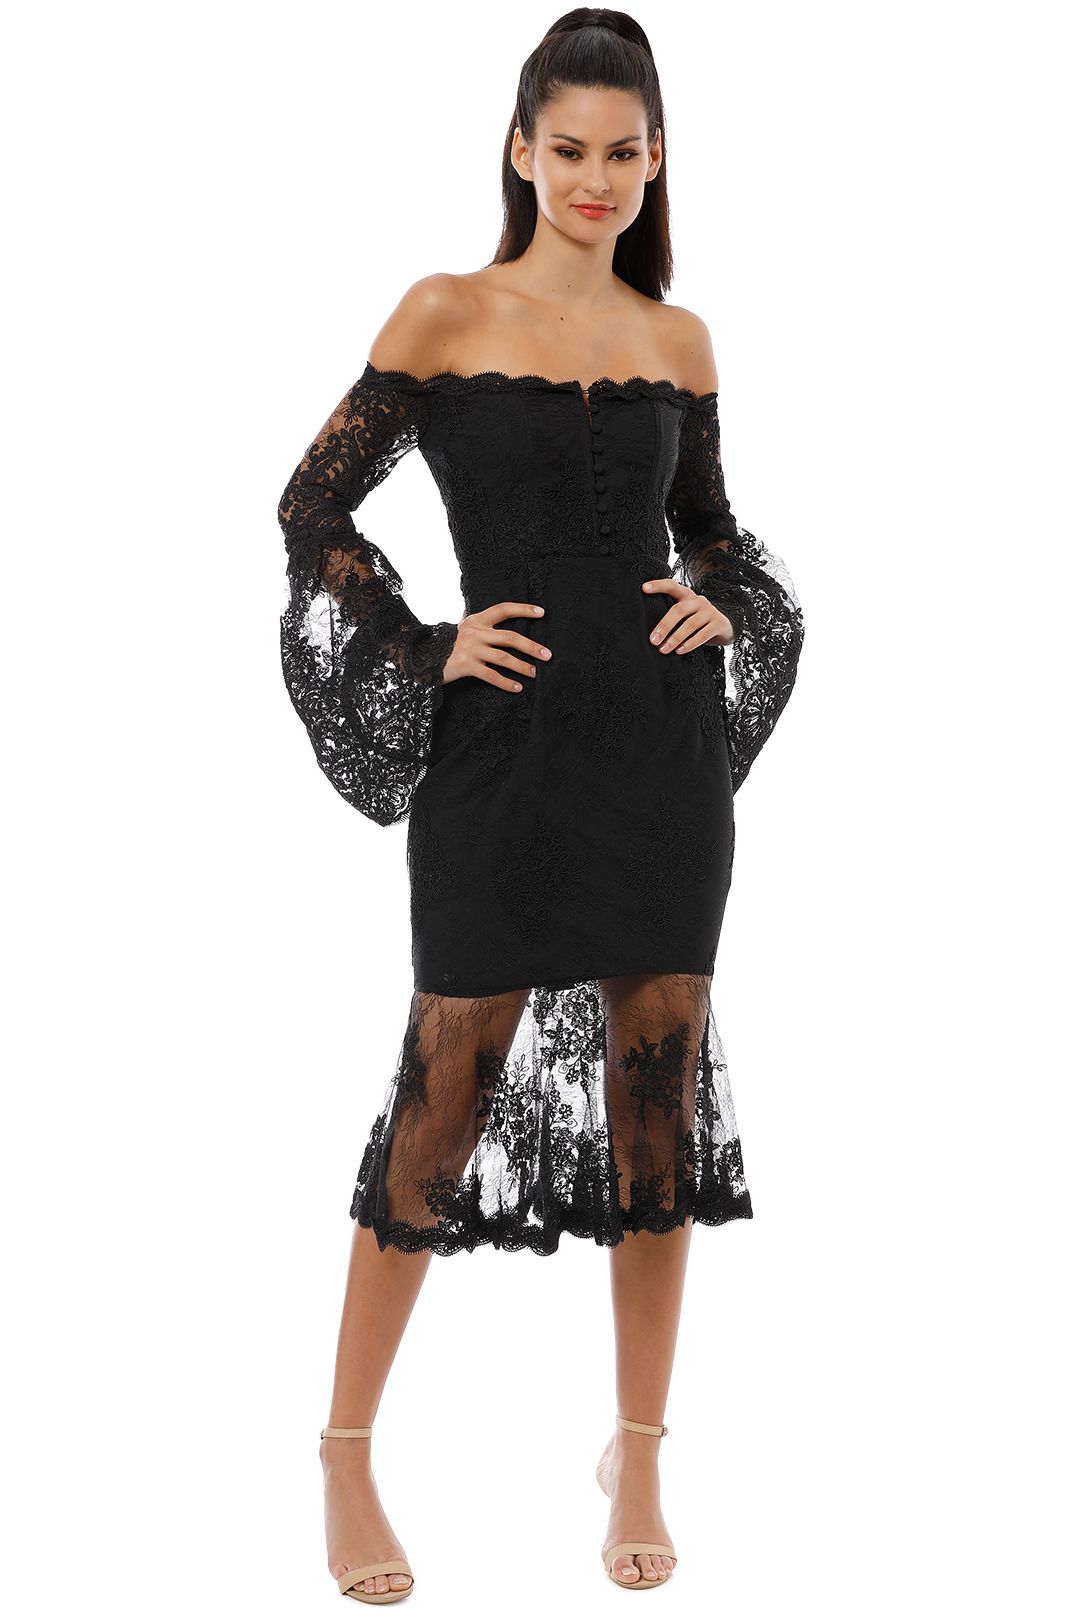 Octavia Lace Corset Midi Dress in Black by Nicholas for Rent